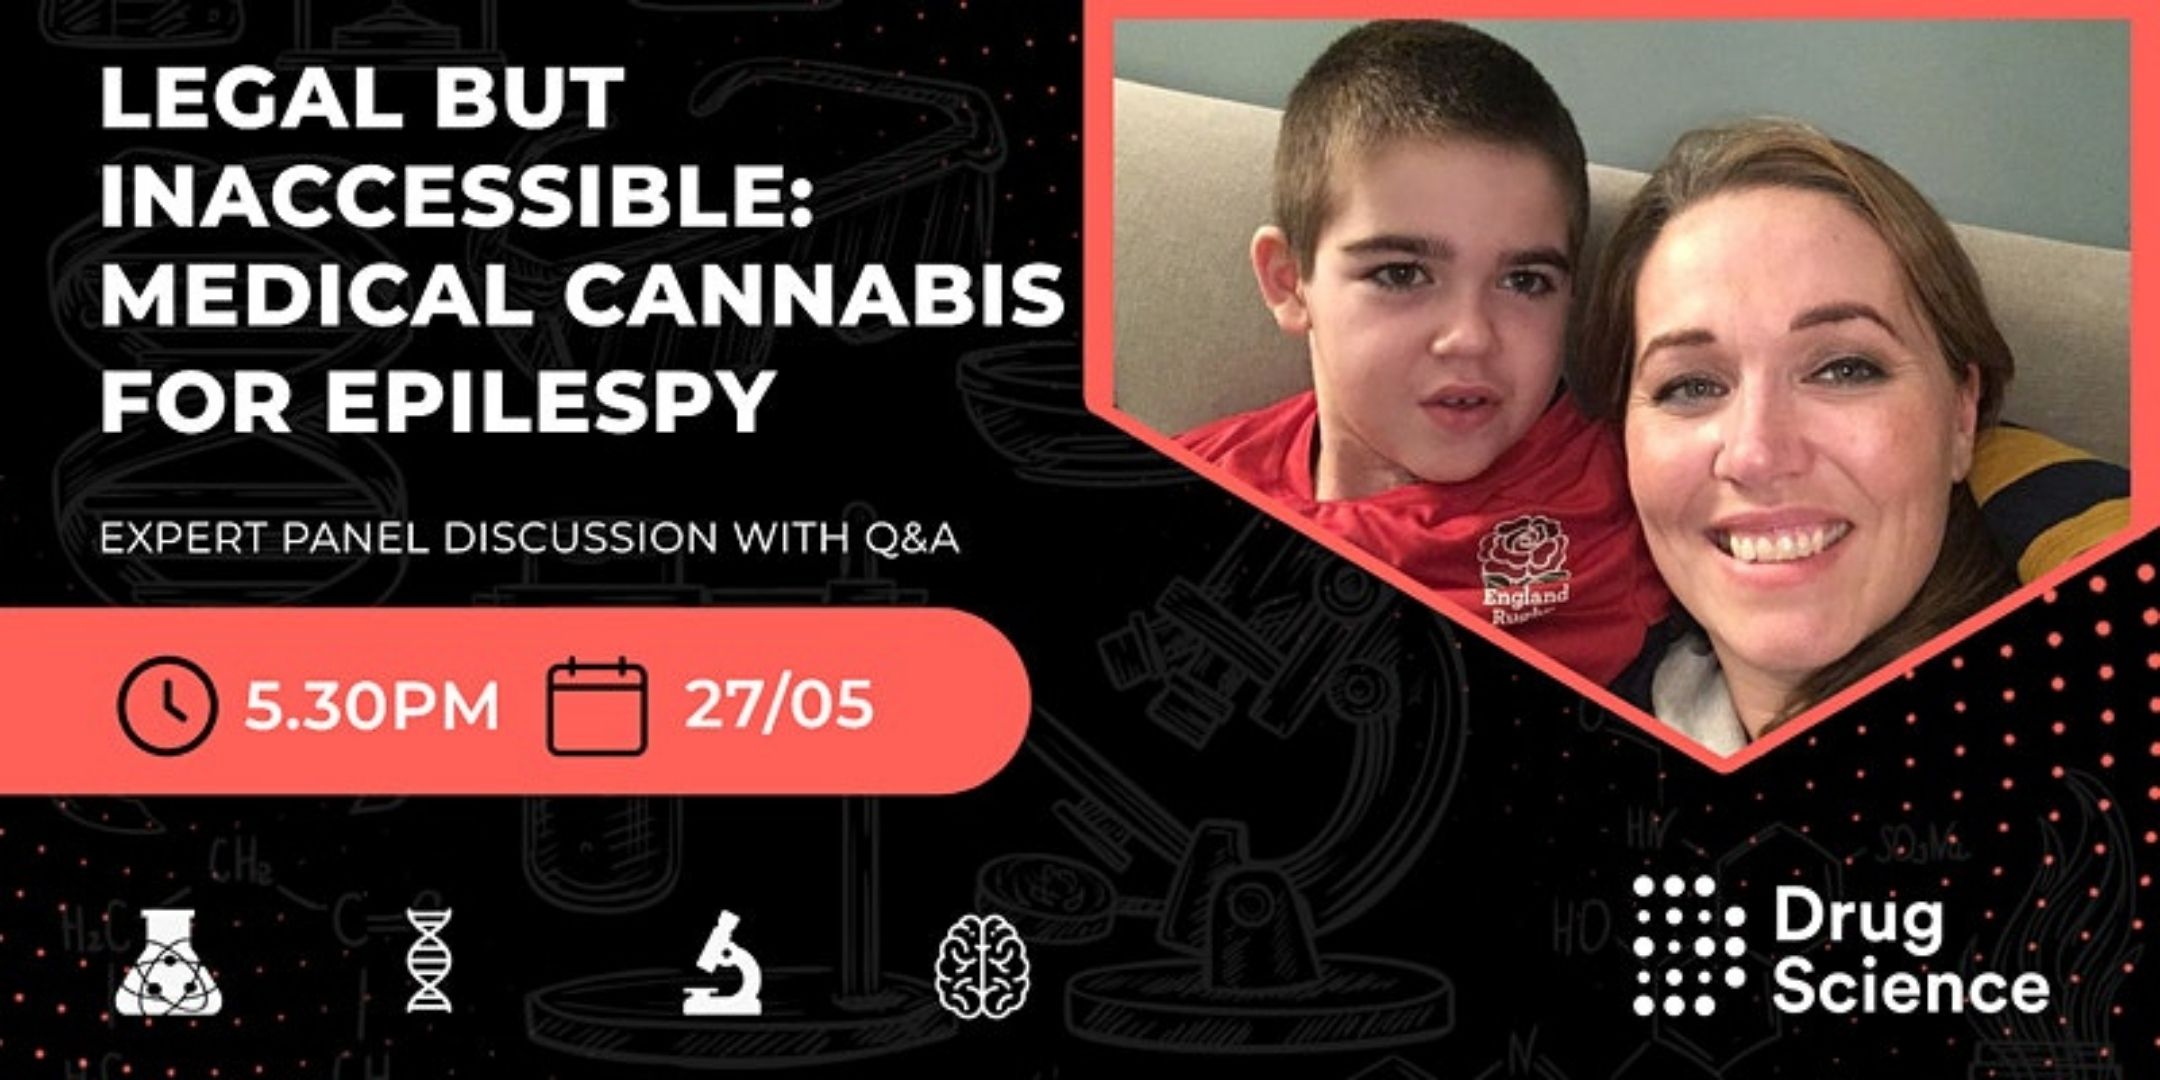 Legal but inaccessible: Medical Cannabis for Epilepsy